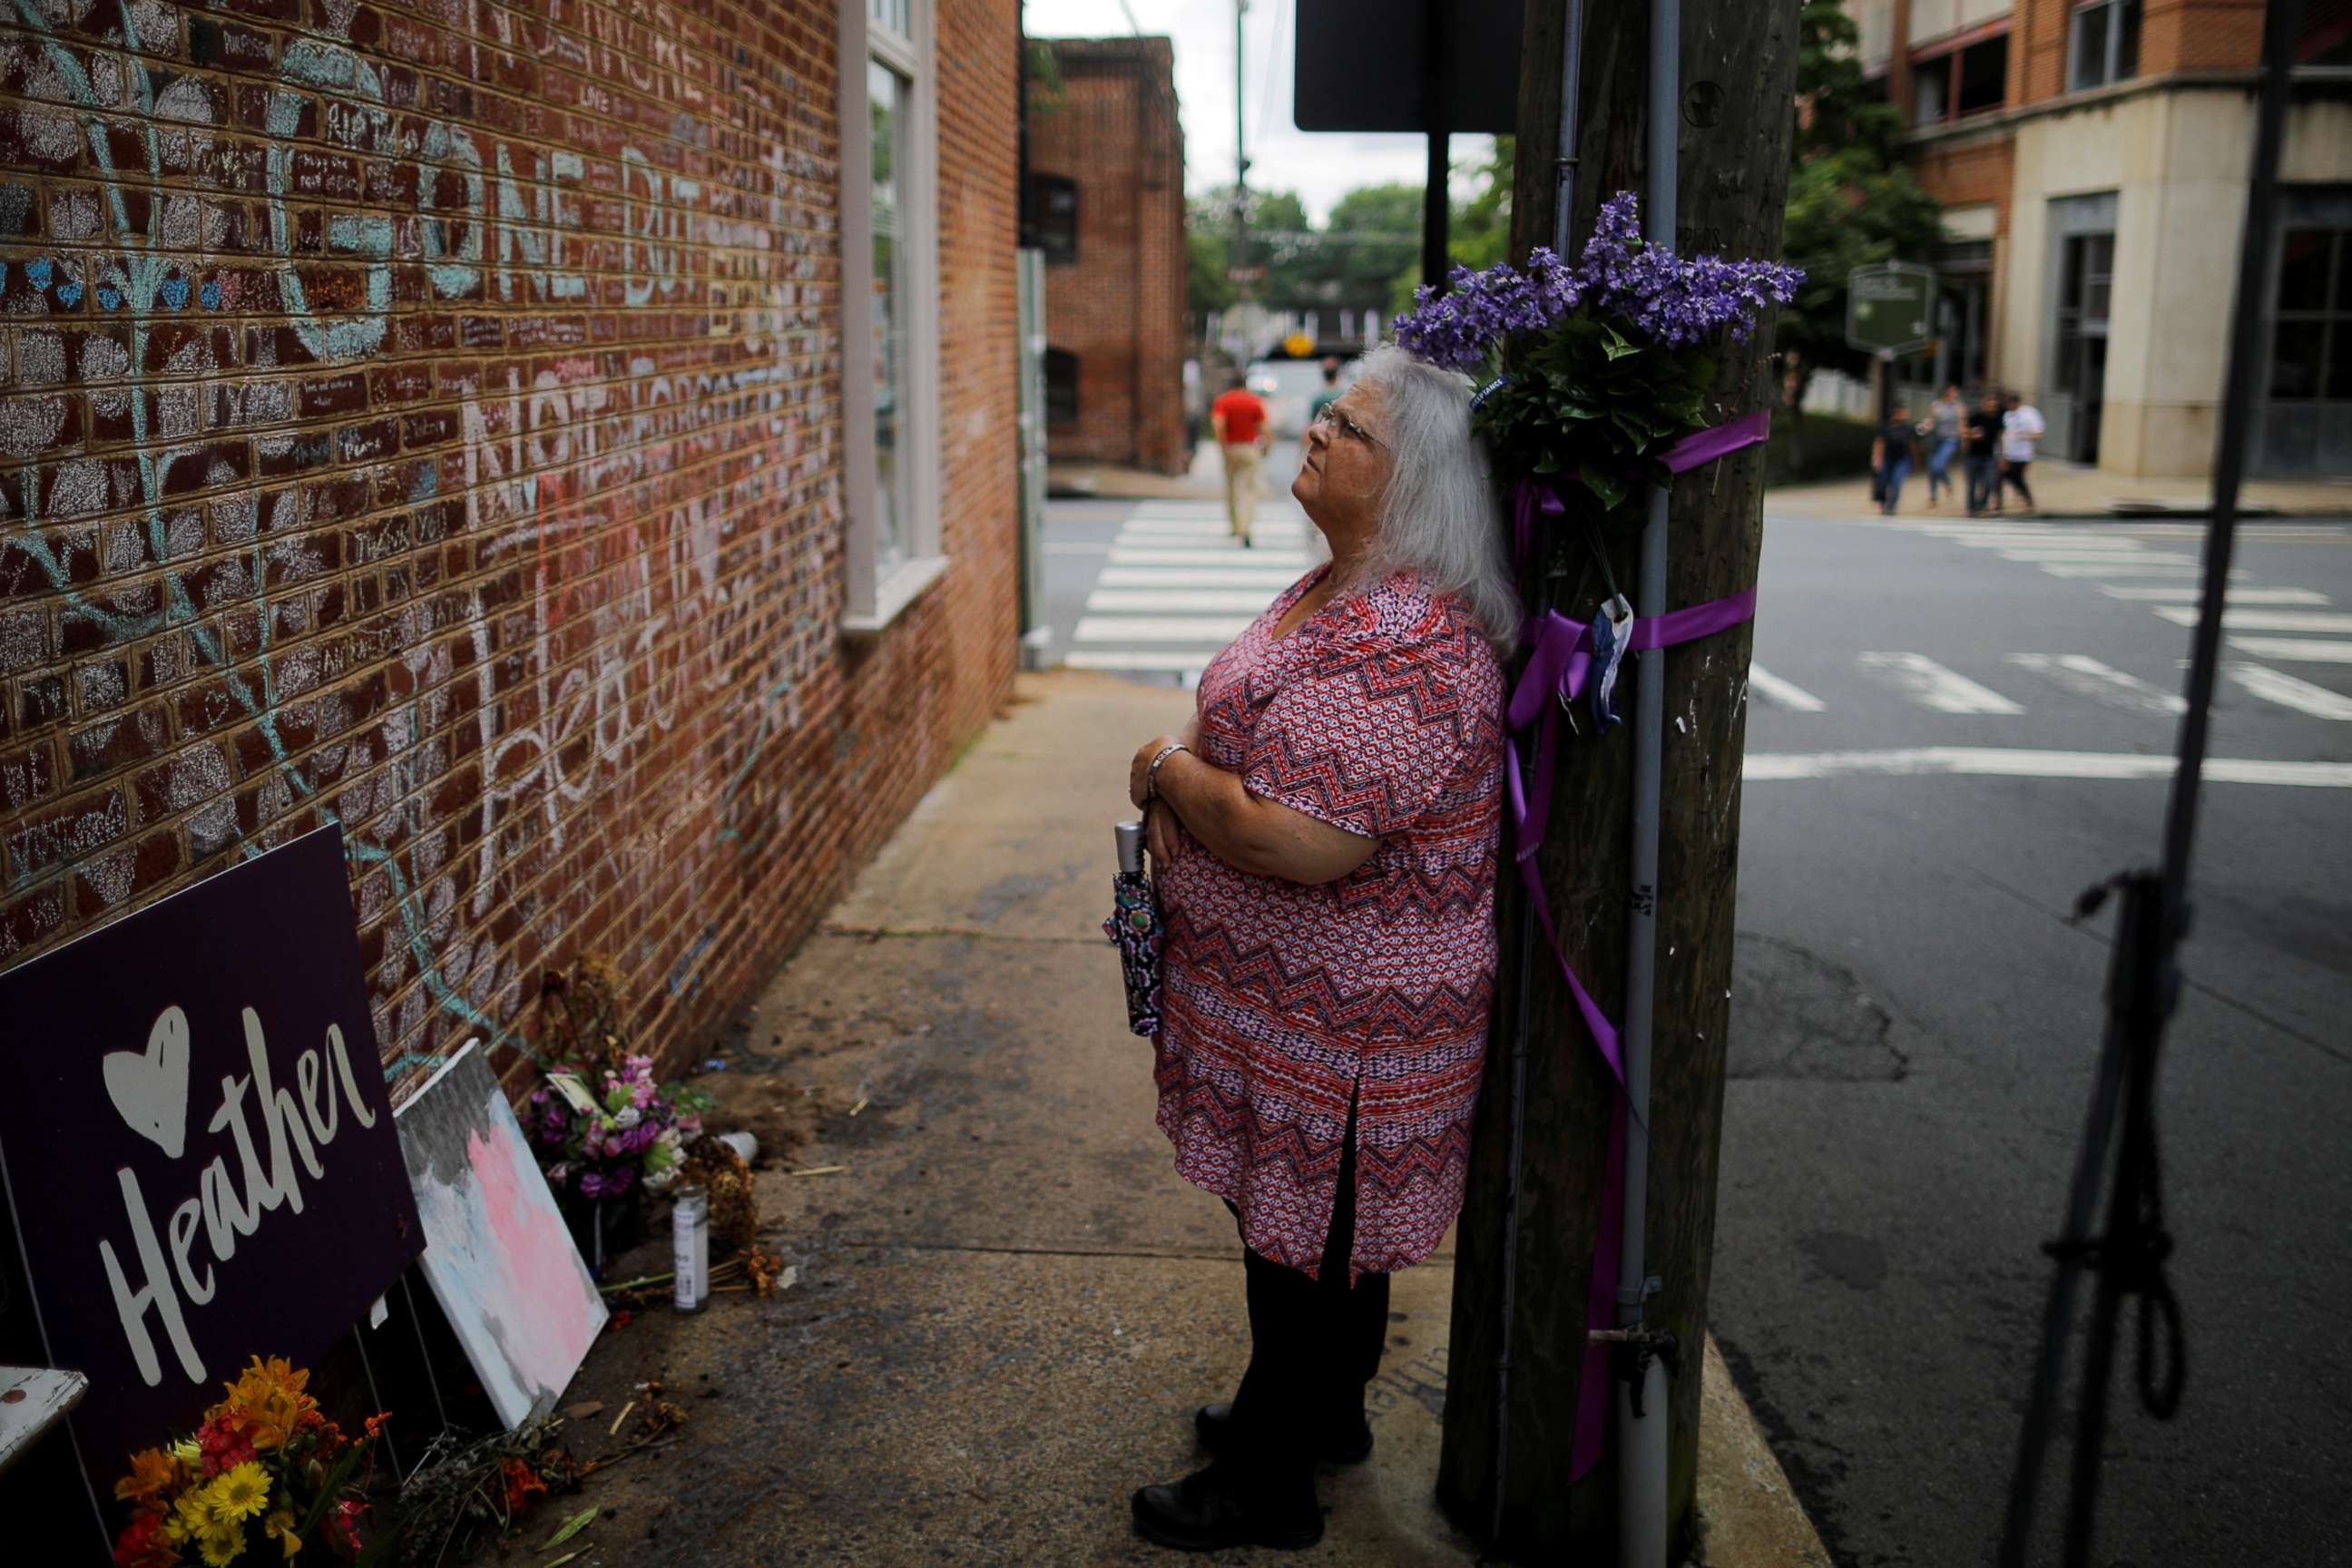 PHOTO: Susan Bro, mother of Heather Heyer, who was killed during the August 2017 white nationalist rally in Charlottesville, stands at the memorial at the site where her daughter was killed in Charlottesville, Virginia, July 31, 2018.